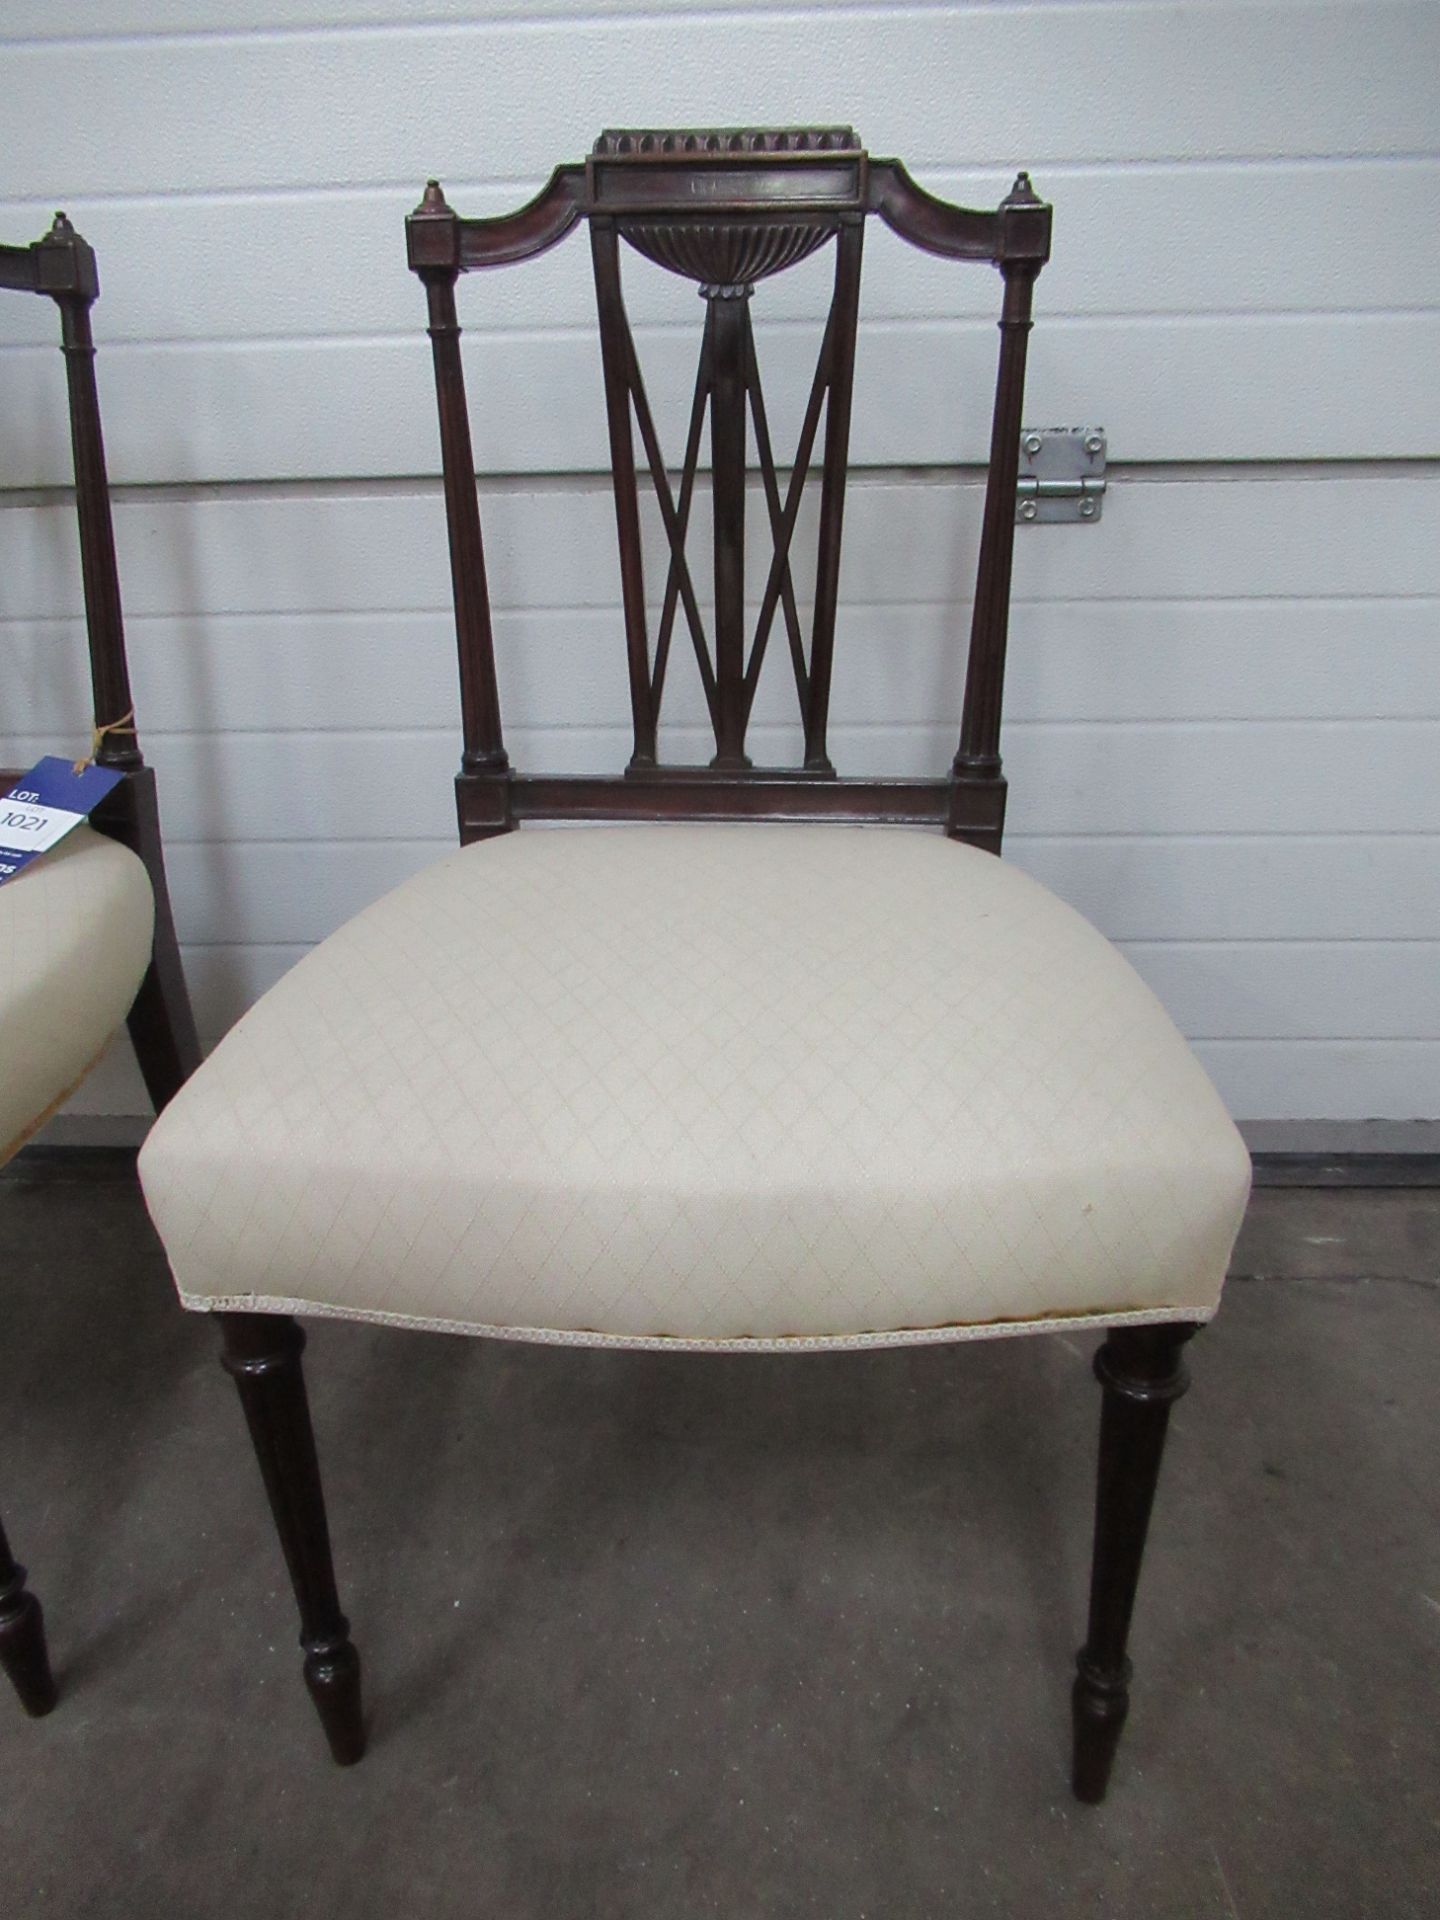 Pair of Mahogany Dining Chairs with Upholstered Seats - Image 2 of 4